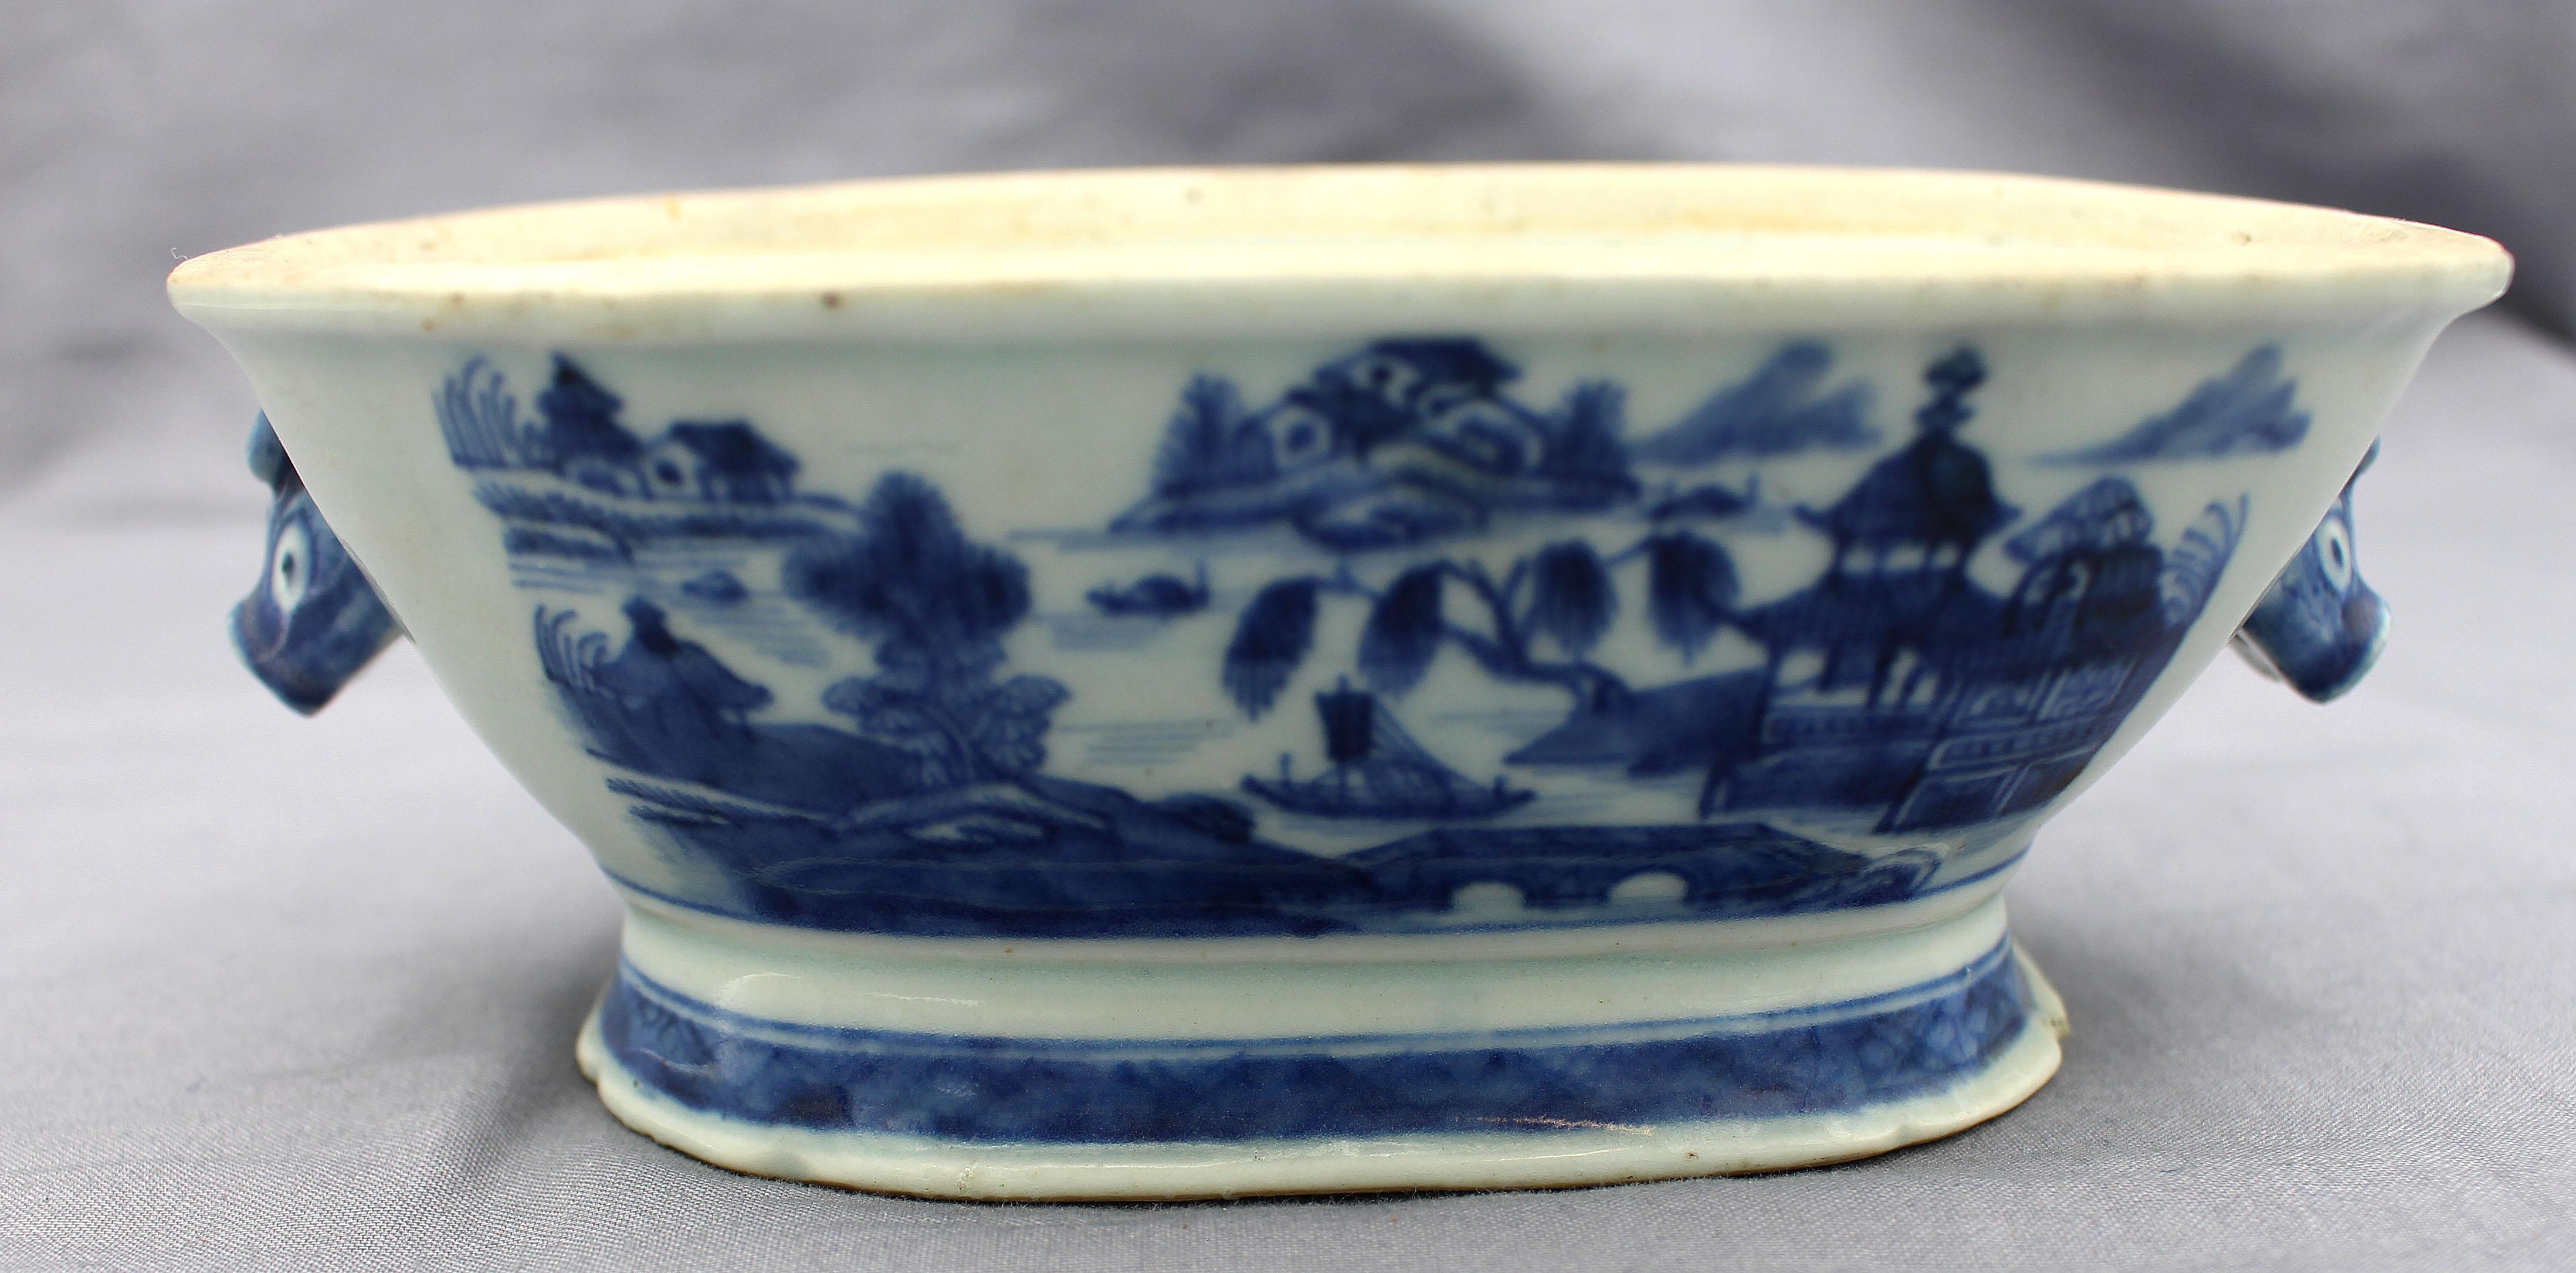 18th Century Circa 1780-1800 Tureen with Associated Stand, Blue Canton, Chinese Export